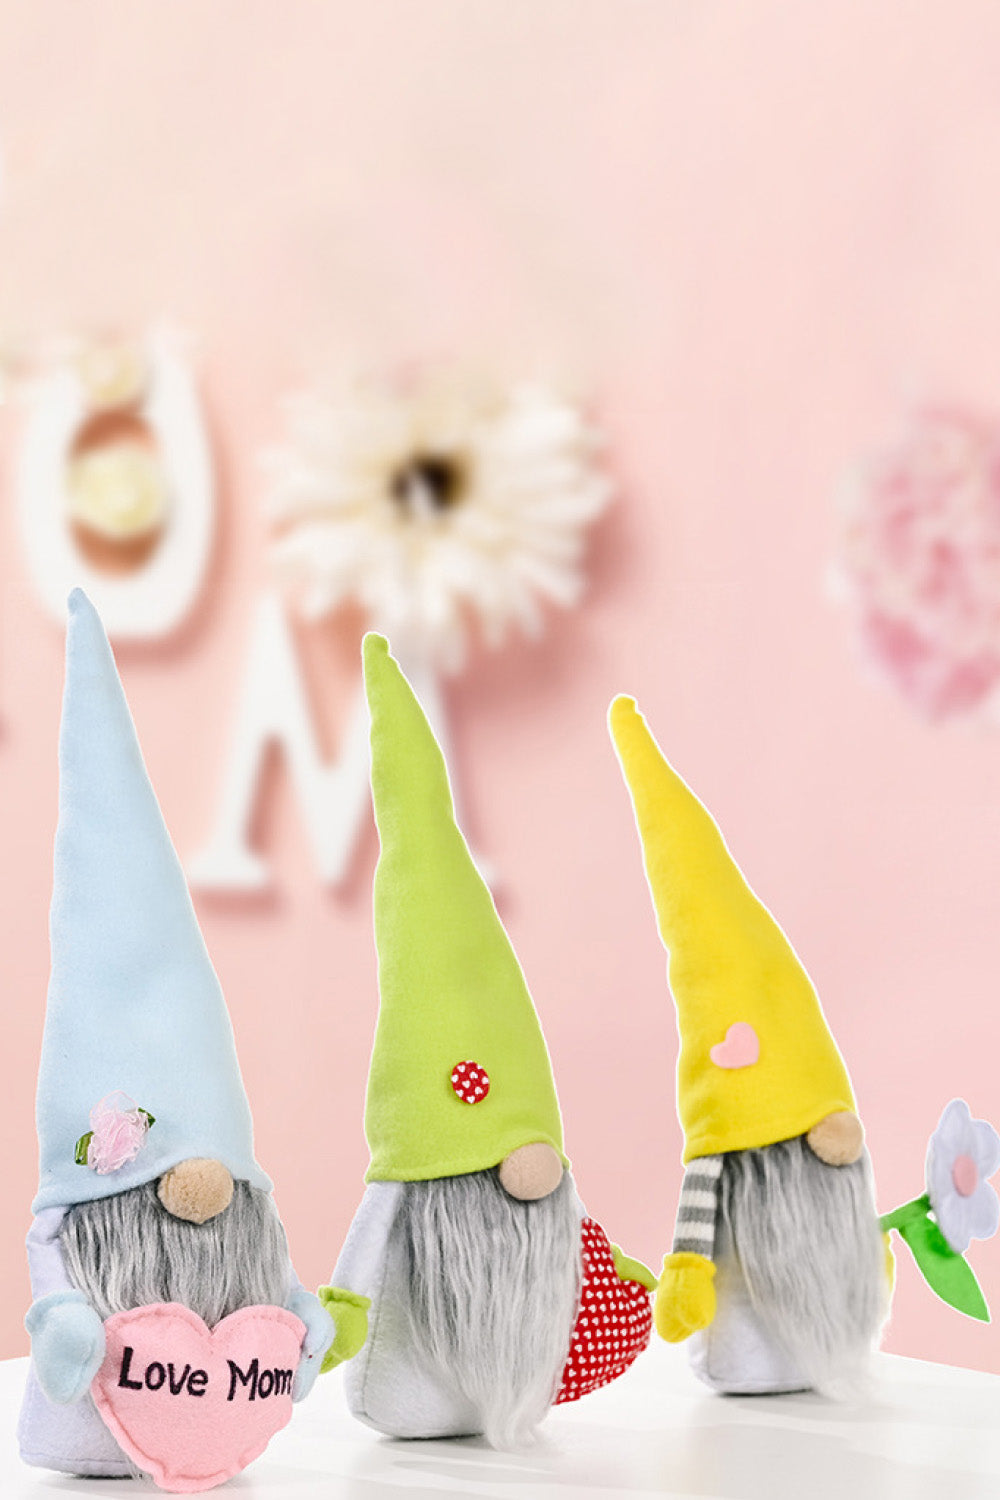 GNOMES—Mother's Day Pointed Hat Cute Gnomes collectibles, choose one from several options